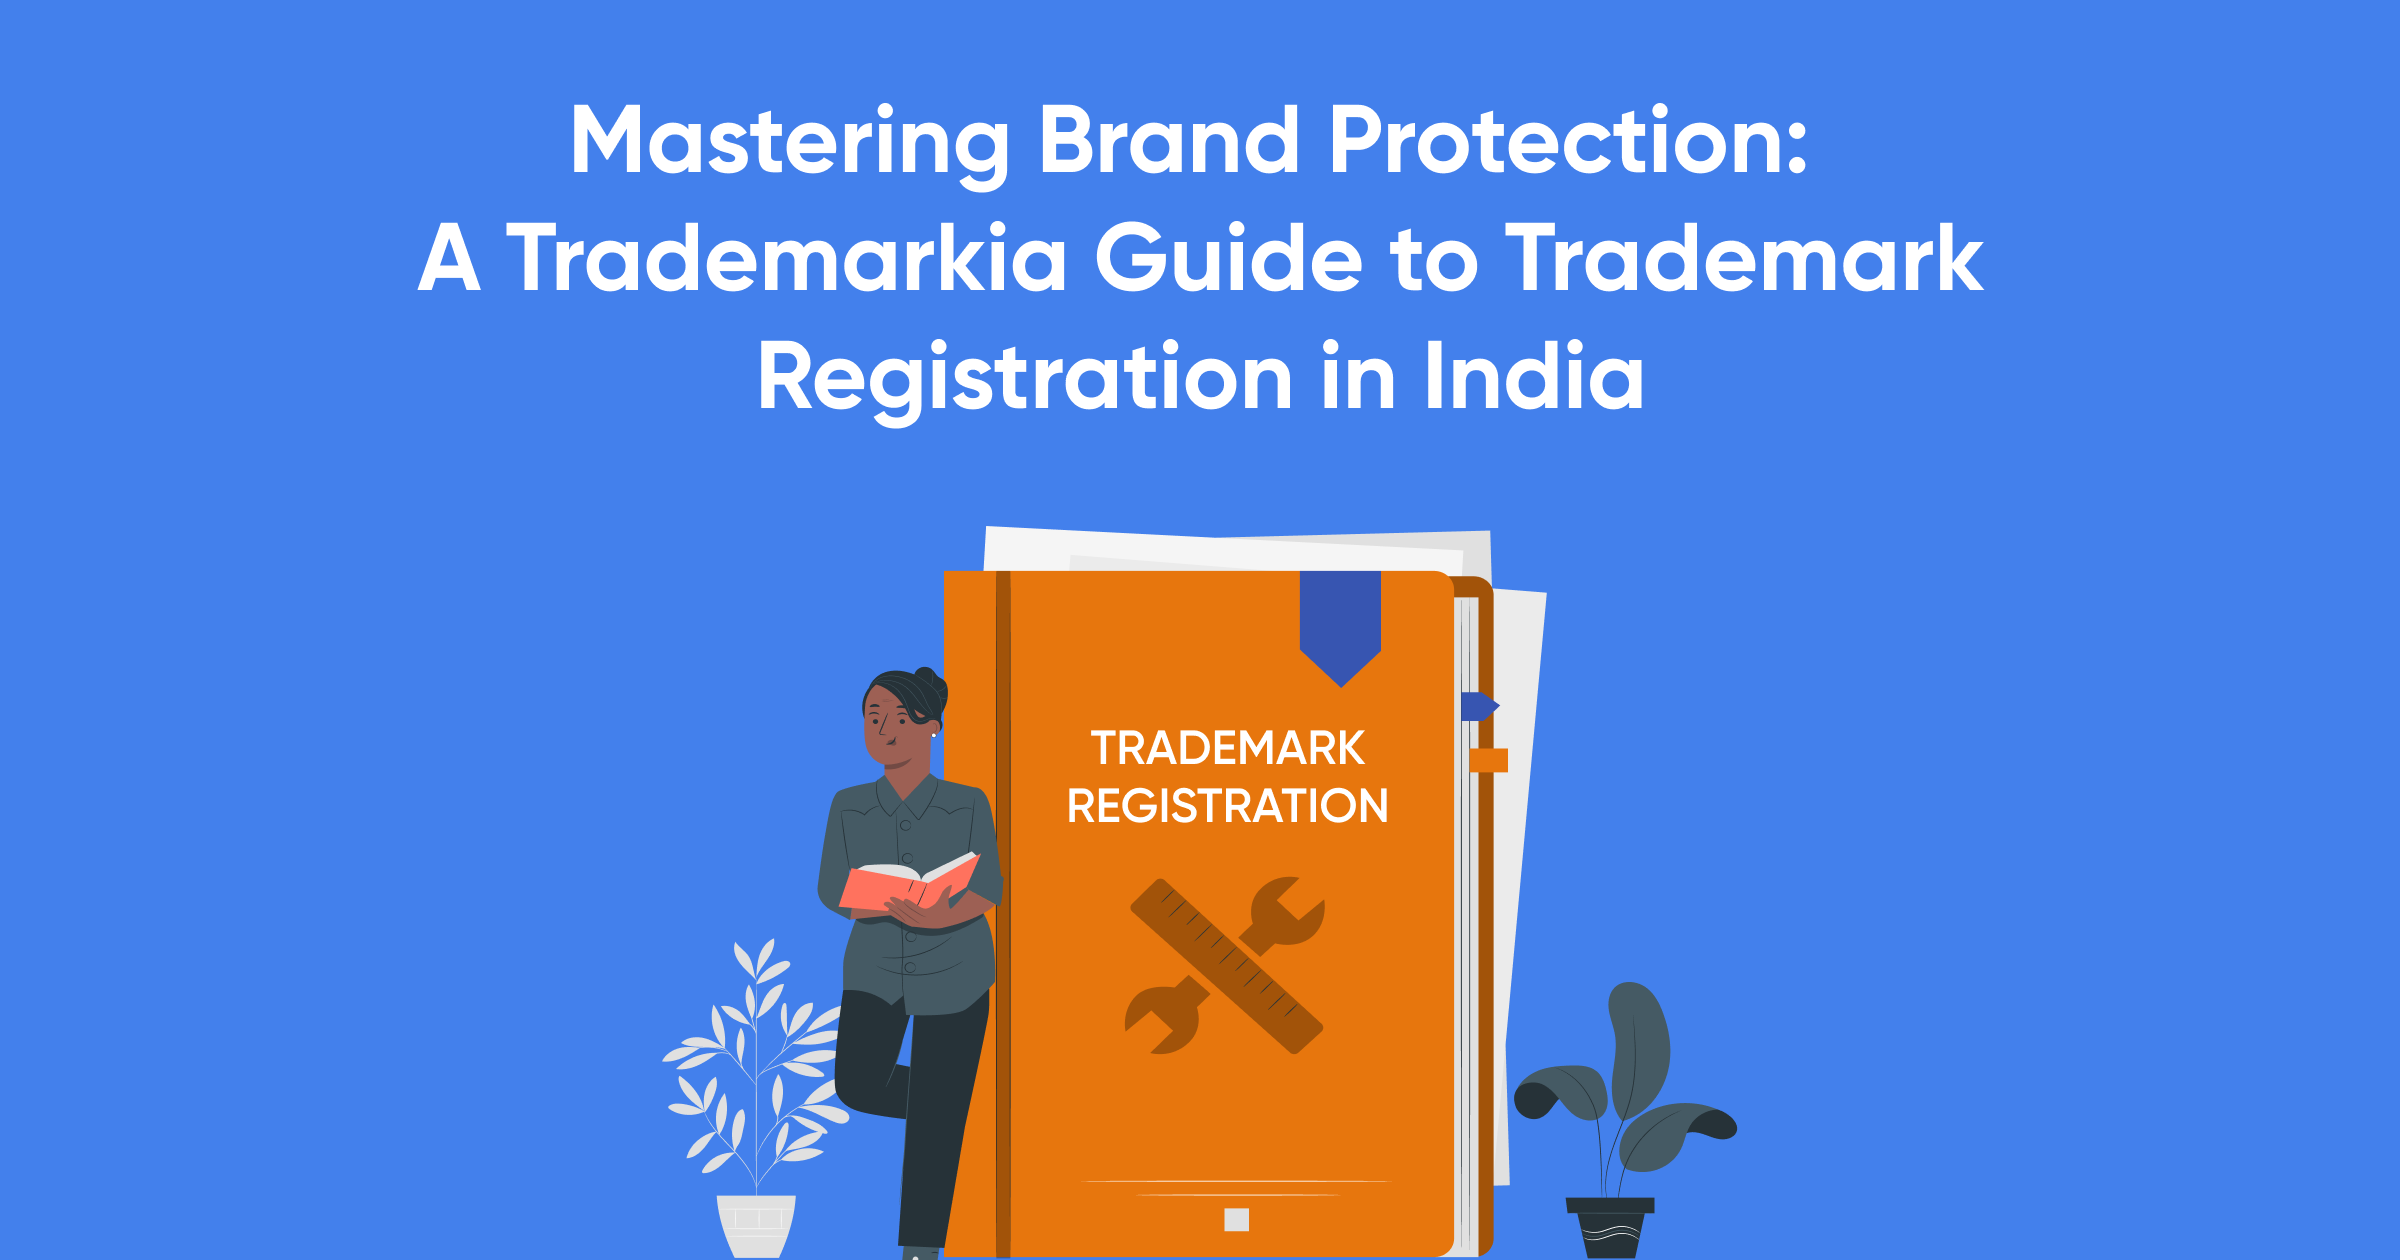 Brand Protection: A Trademarkia Guide to Trademark Registration in India